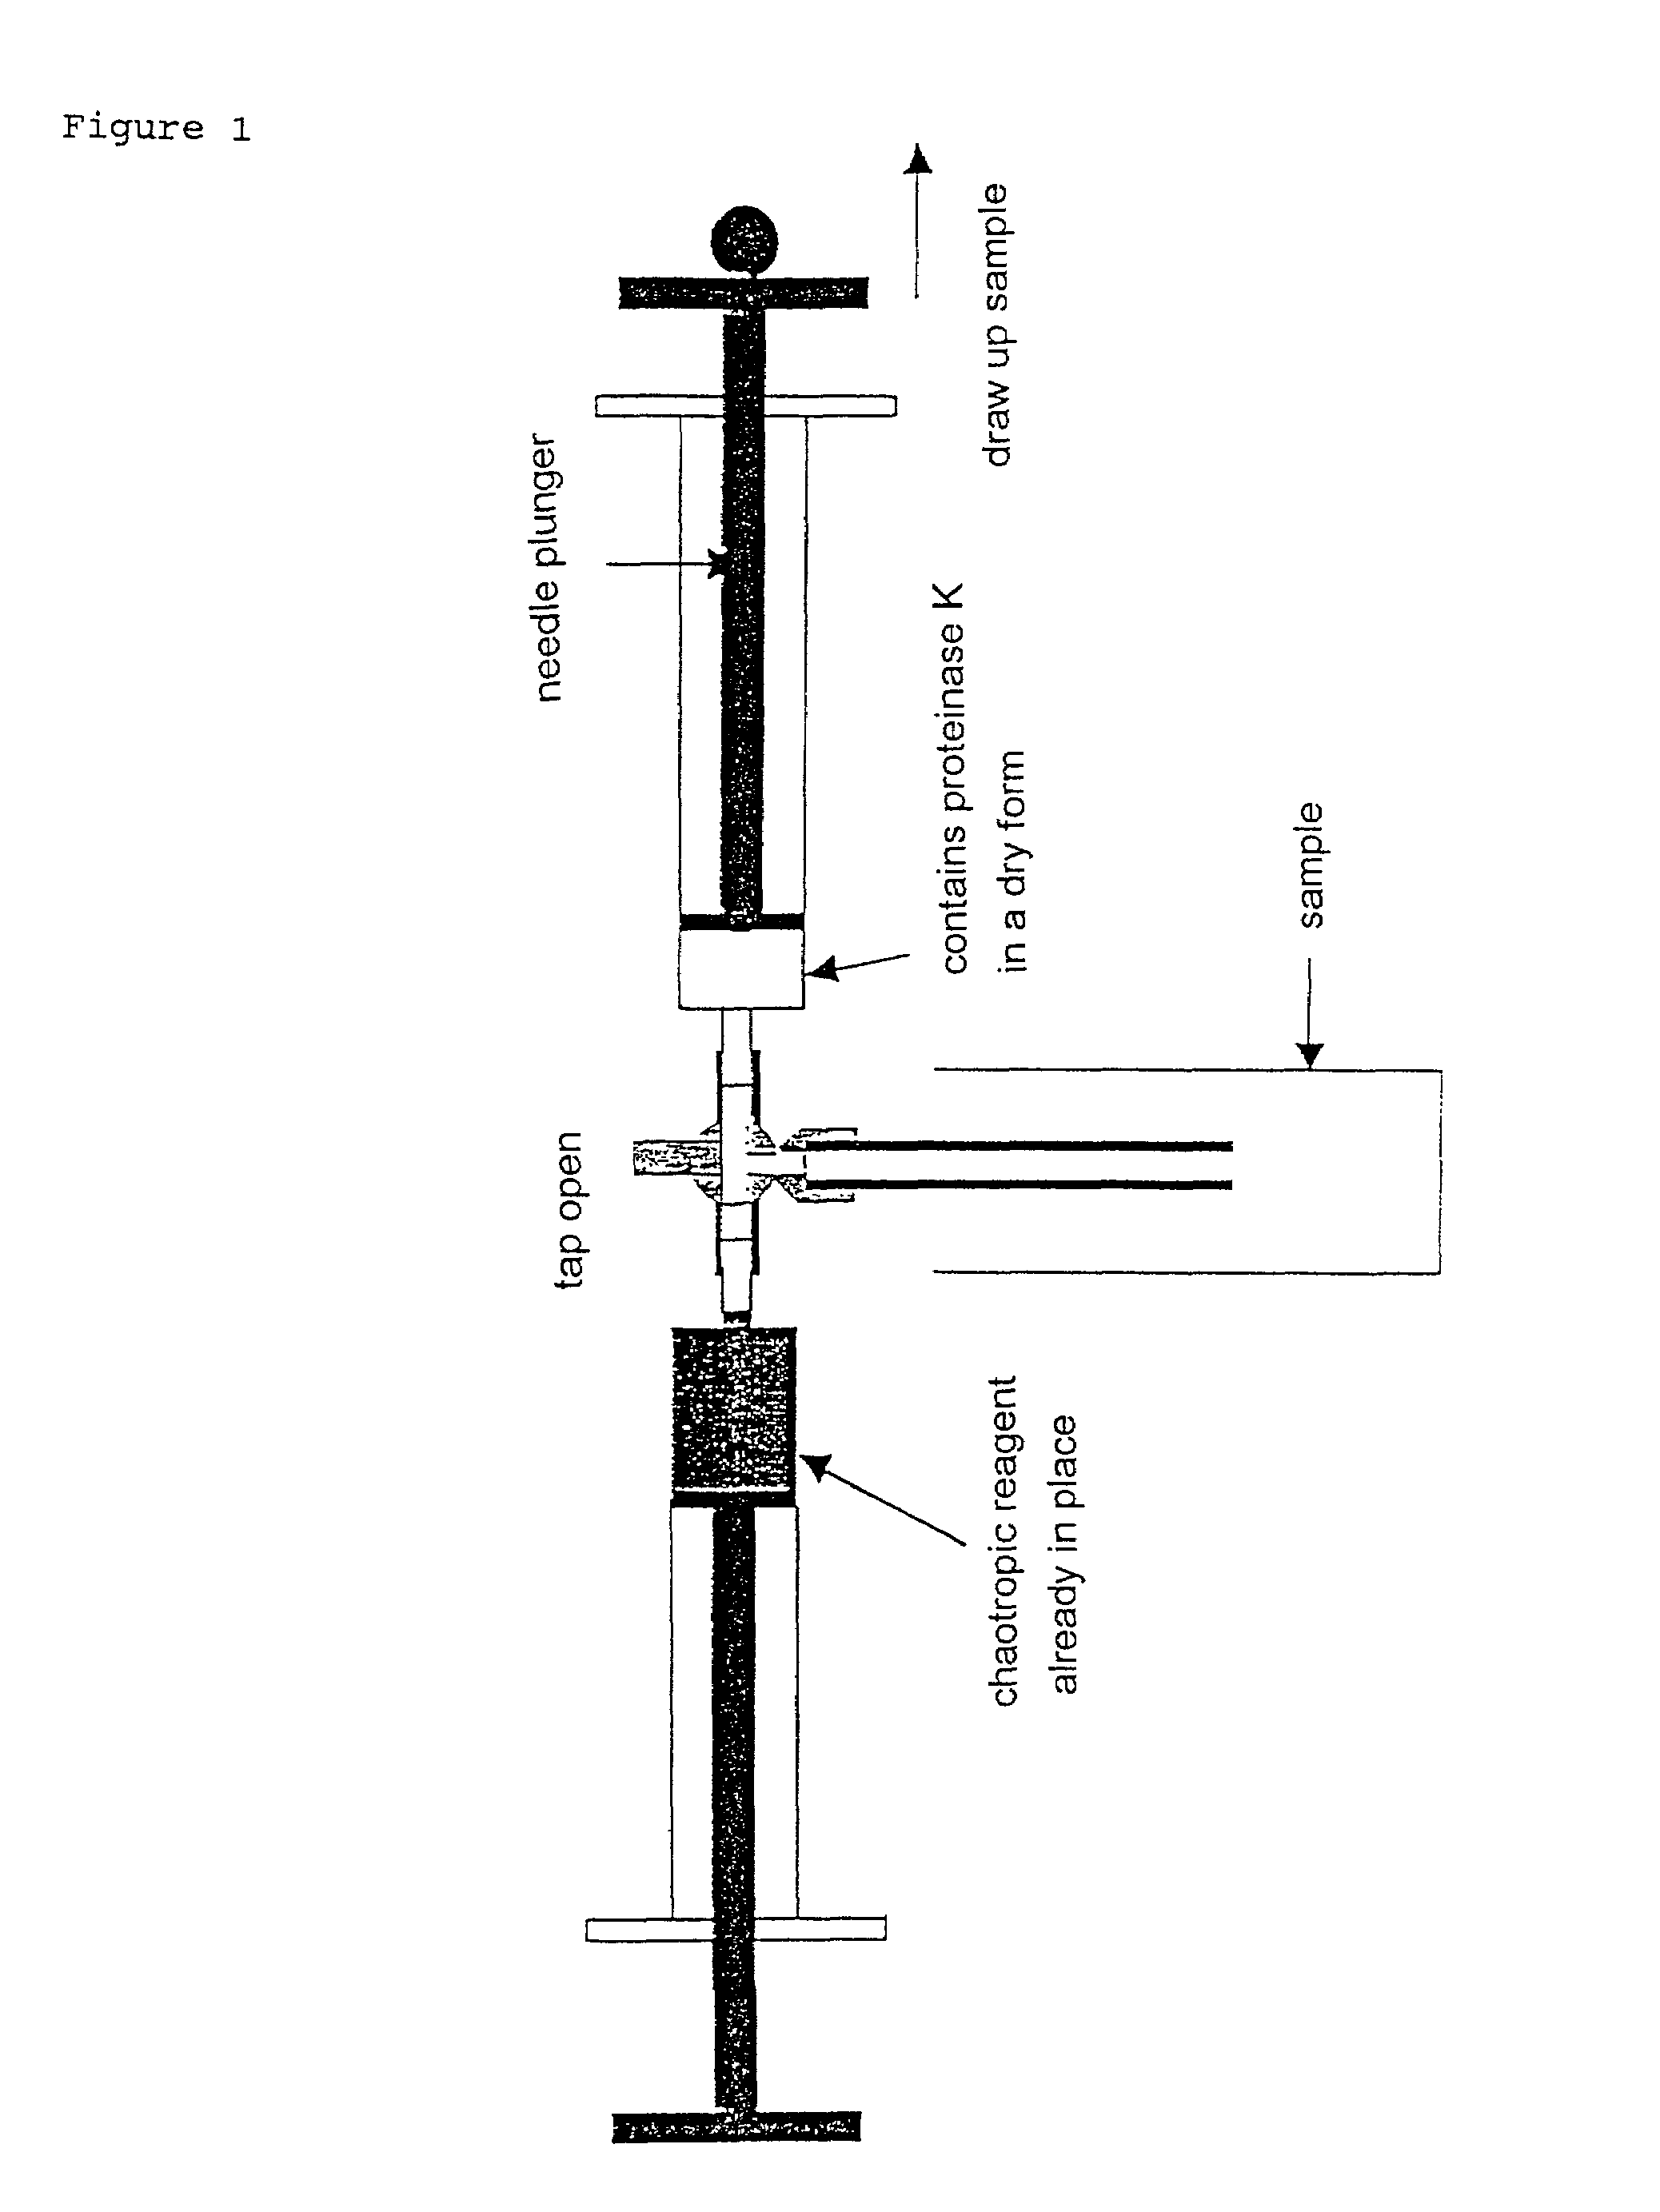 System for simple nucleic acid analysis